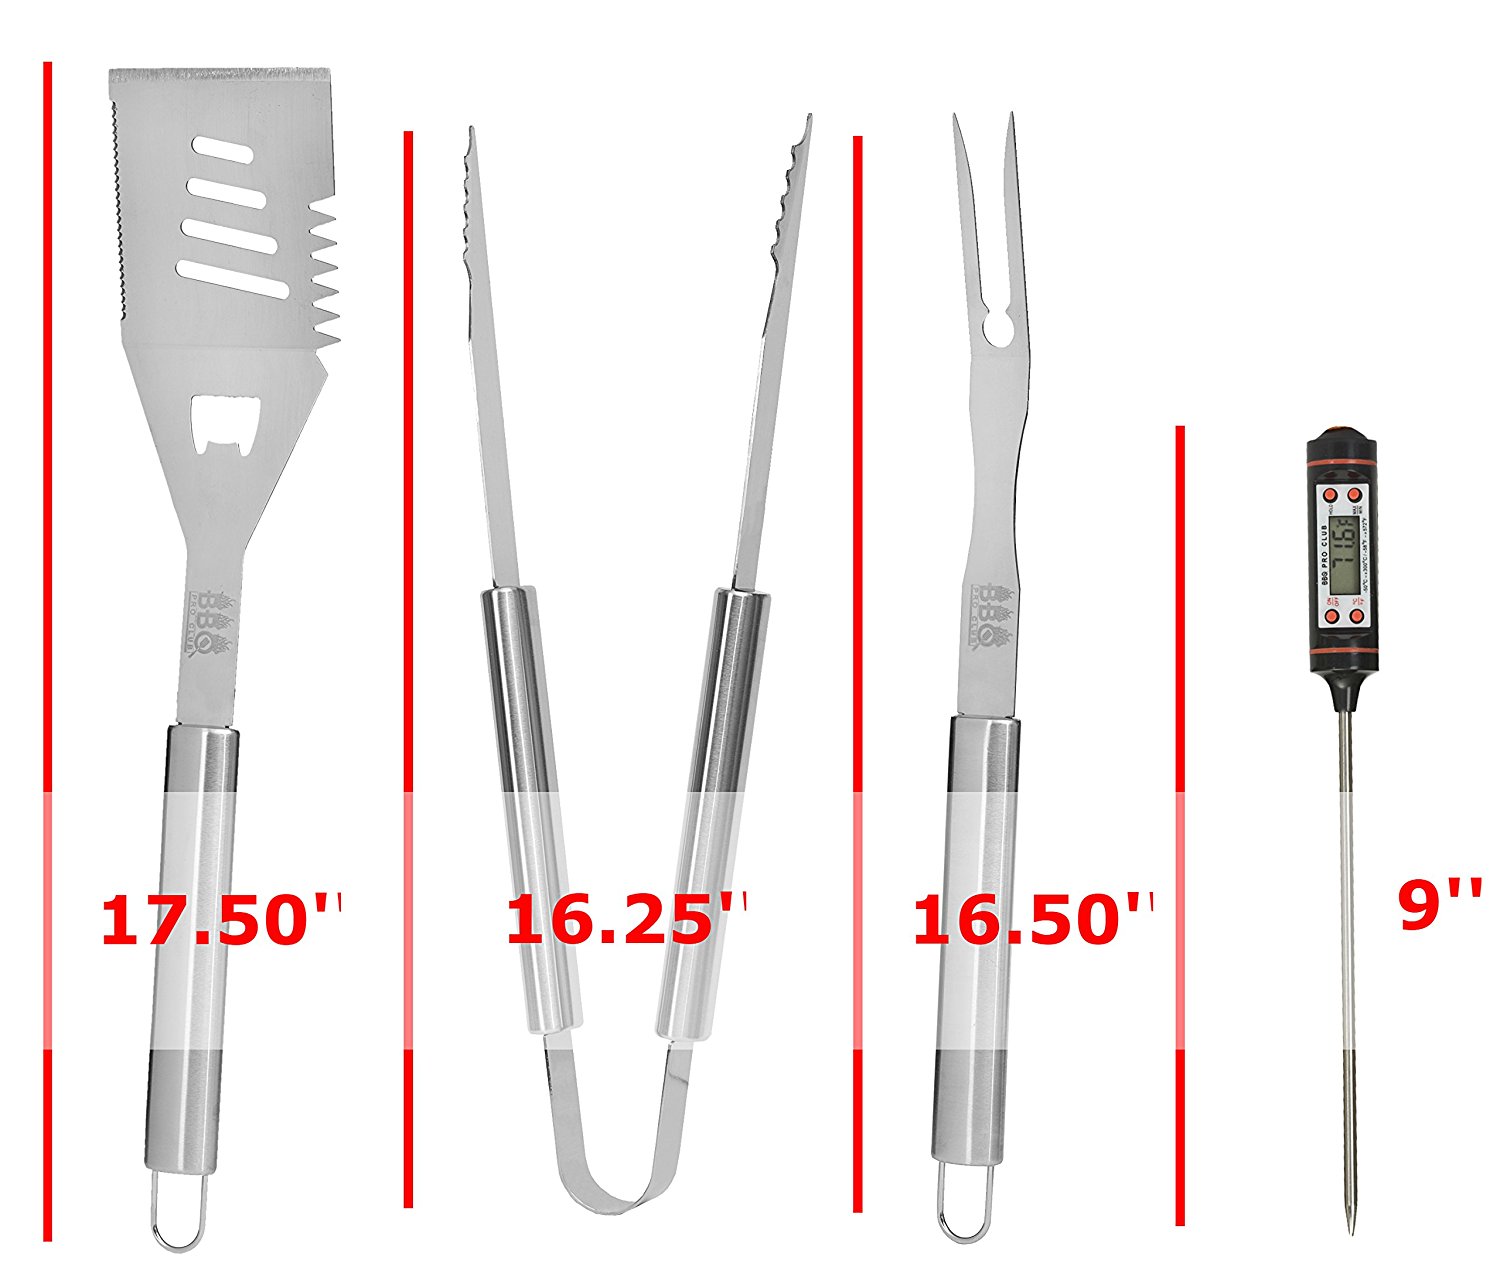 Grill Accessories, 4 piece BBQ Tool Grill Set - Grill Tools Includes Stainless Steel Metal Spatula, Fork, Tongs and Instant Read Meat BBQ Thermometer, Great For Gifts - By BBQ Pro Club - image 3 of 7